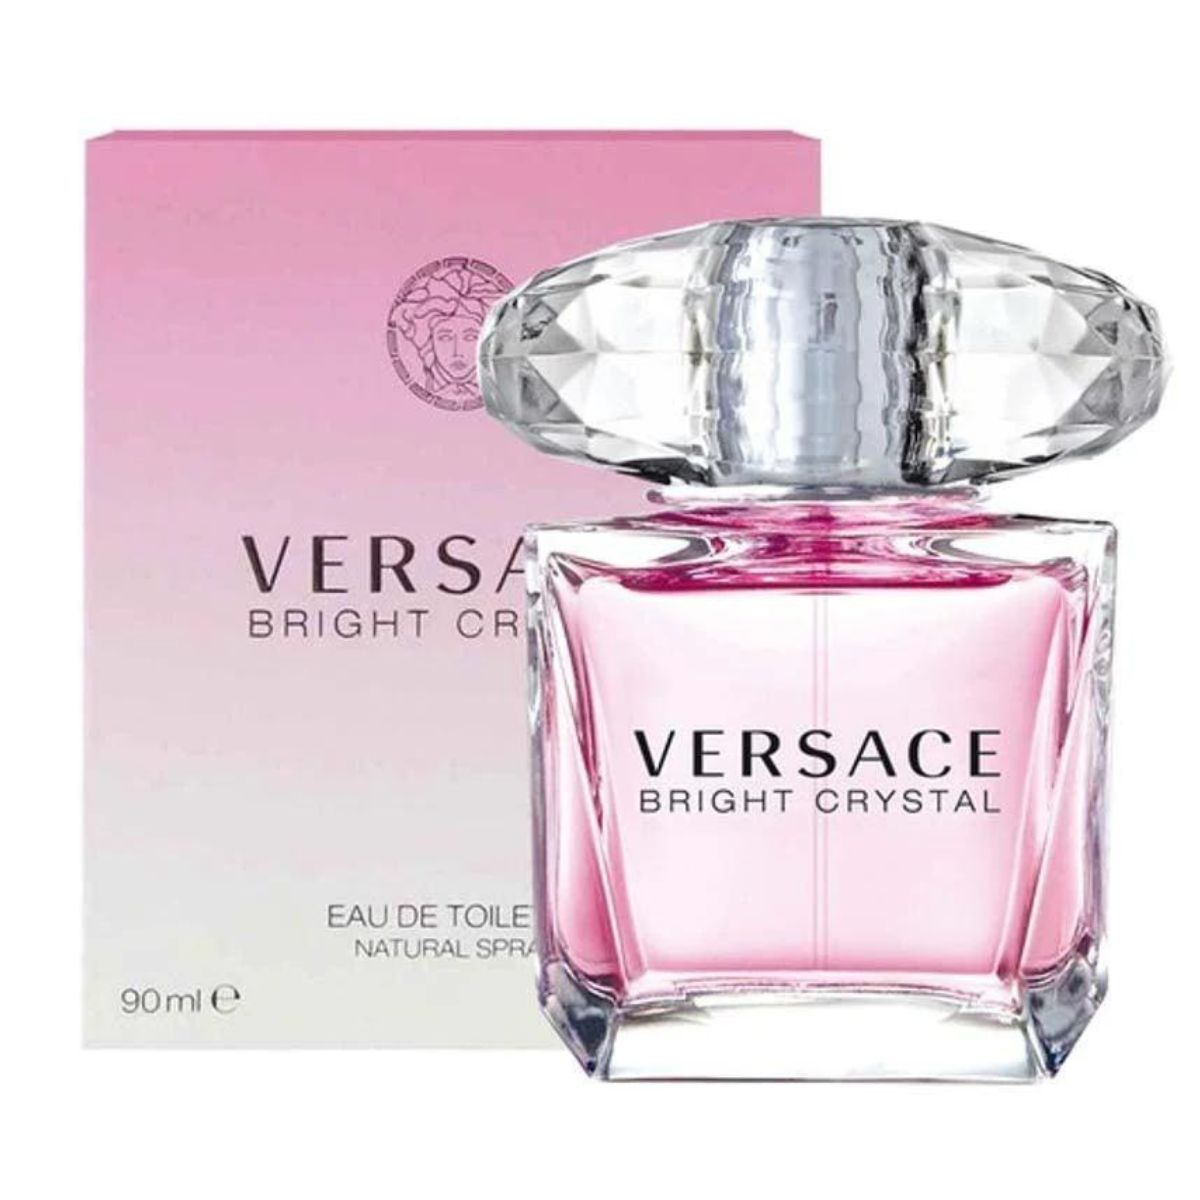 Bright Crystal by Versace